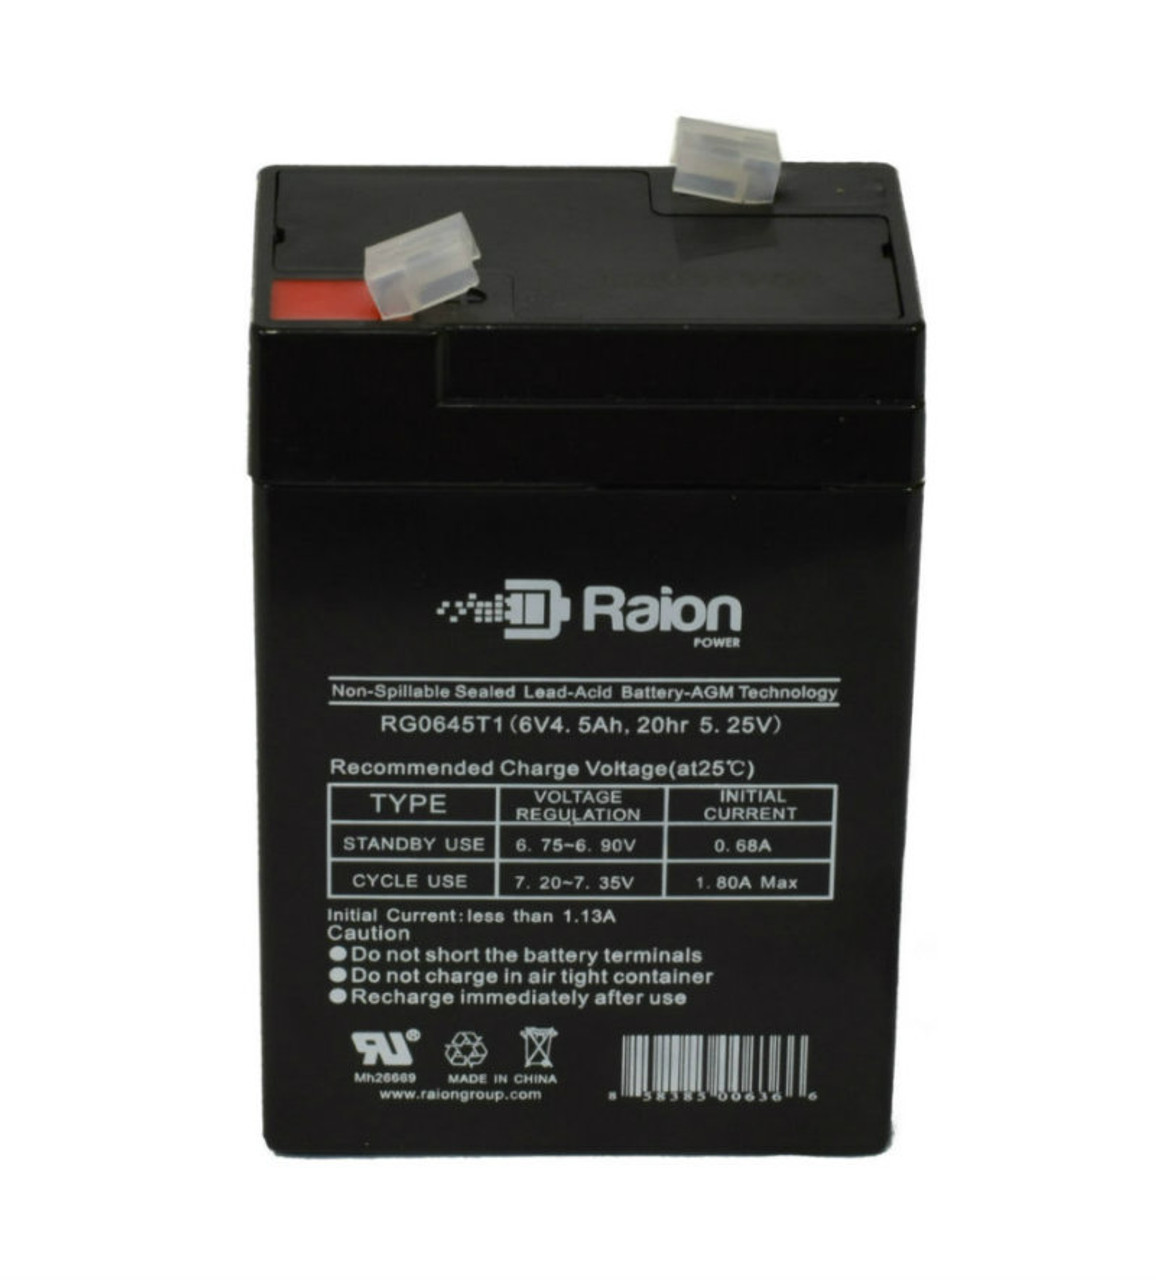 Raion Power RG0645T1 Replacement Battery Cartridge for Unibo GB6-4